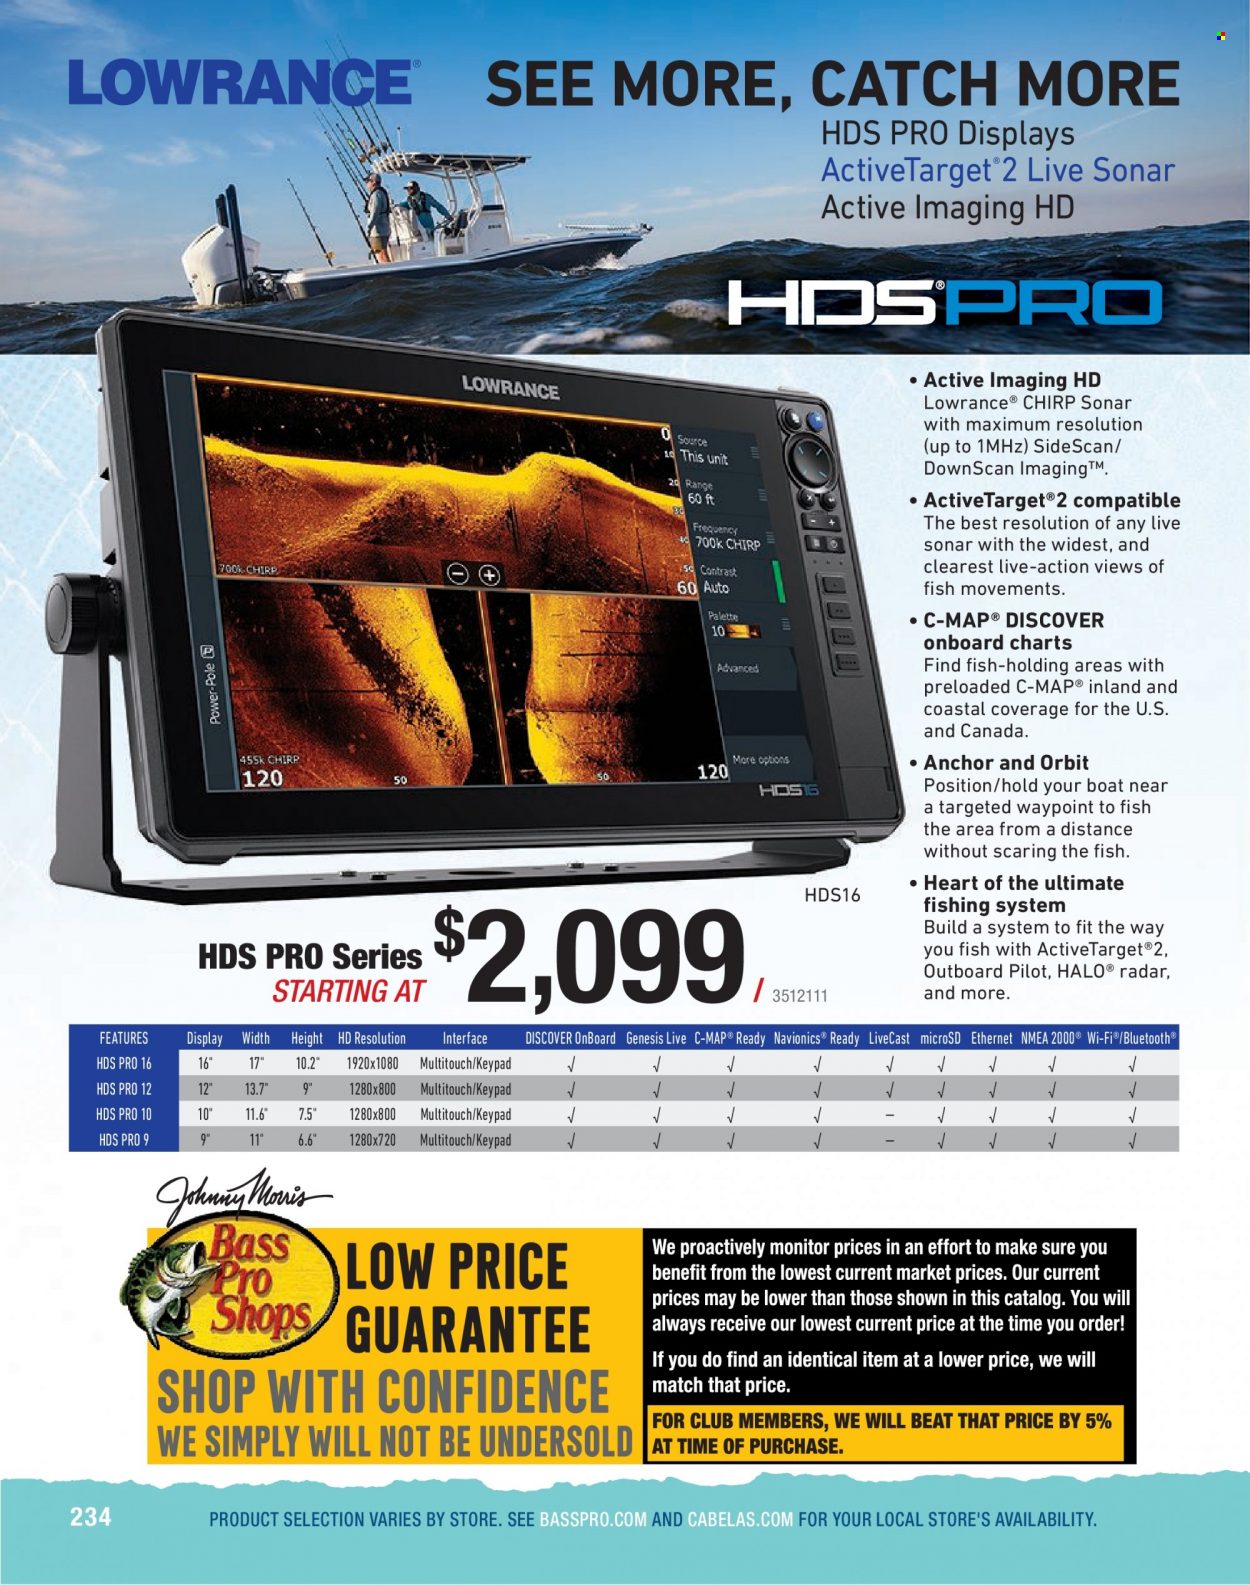 Bass Pro Shops Flyer - Sales products - Orbit, Anchor, Lowrance. Page 234.